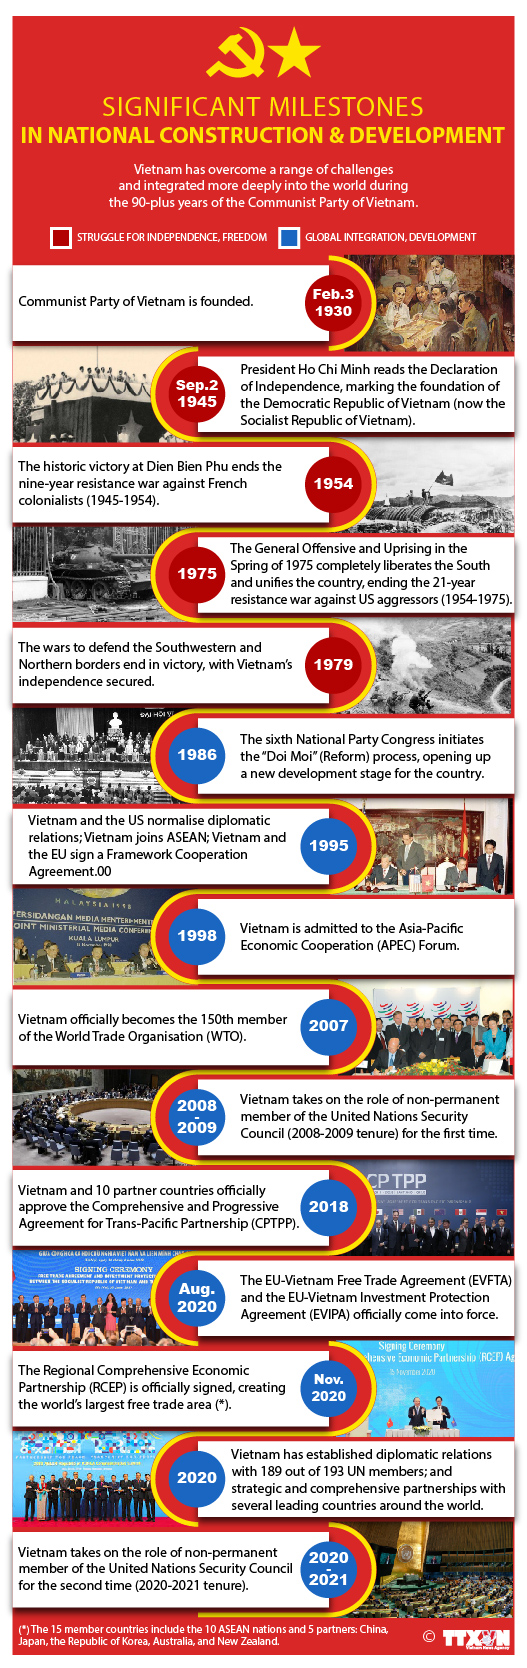 Significant milestones in national construction and development